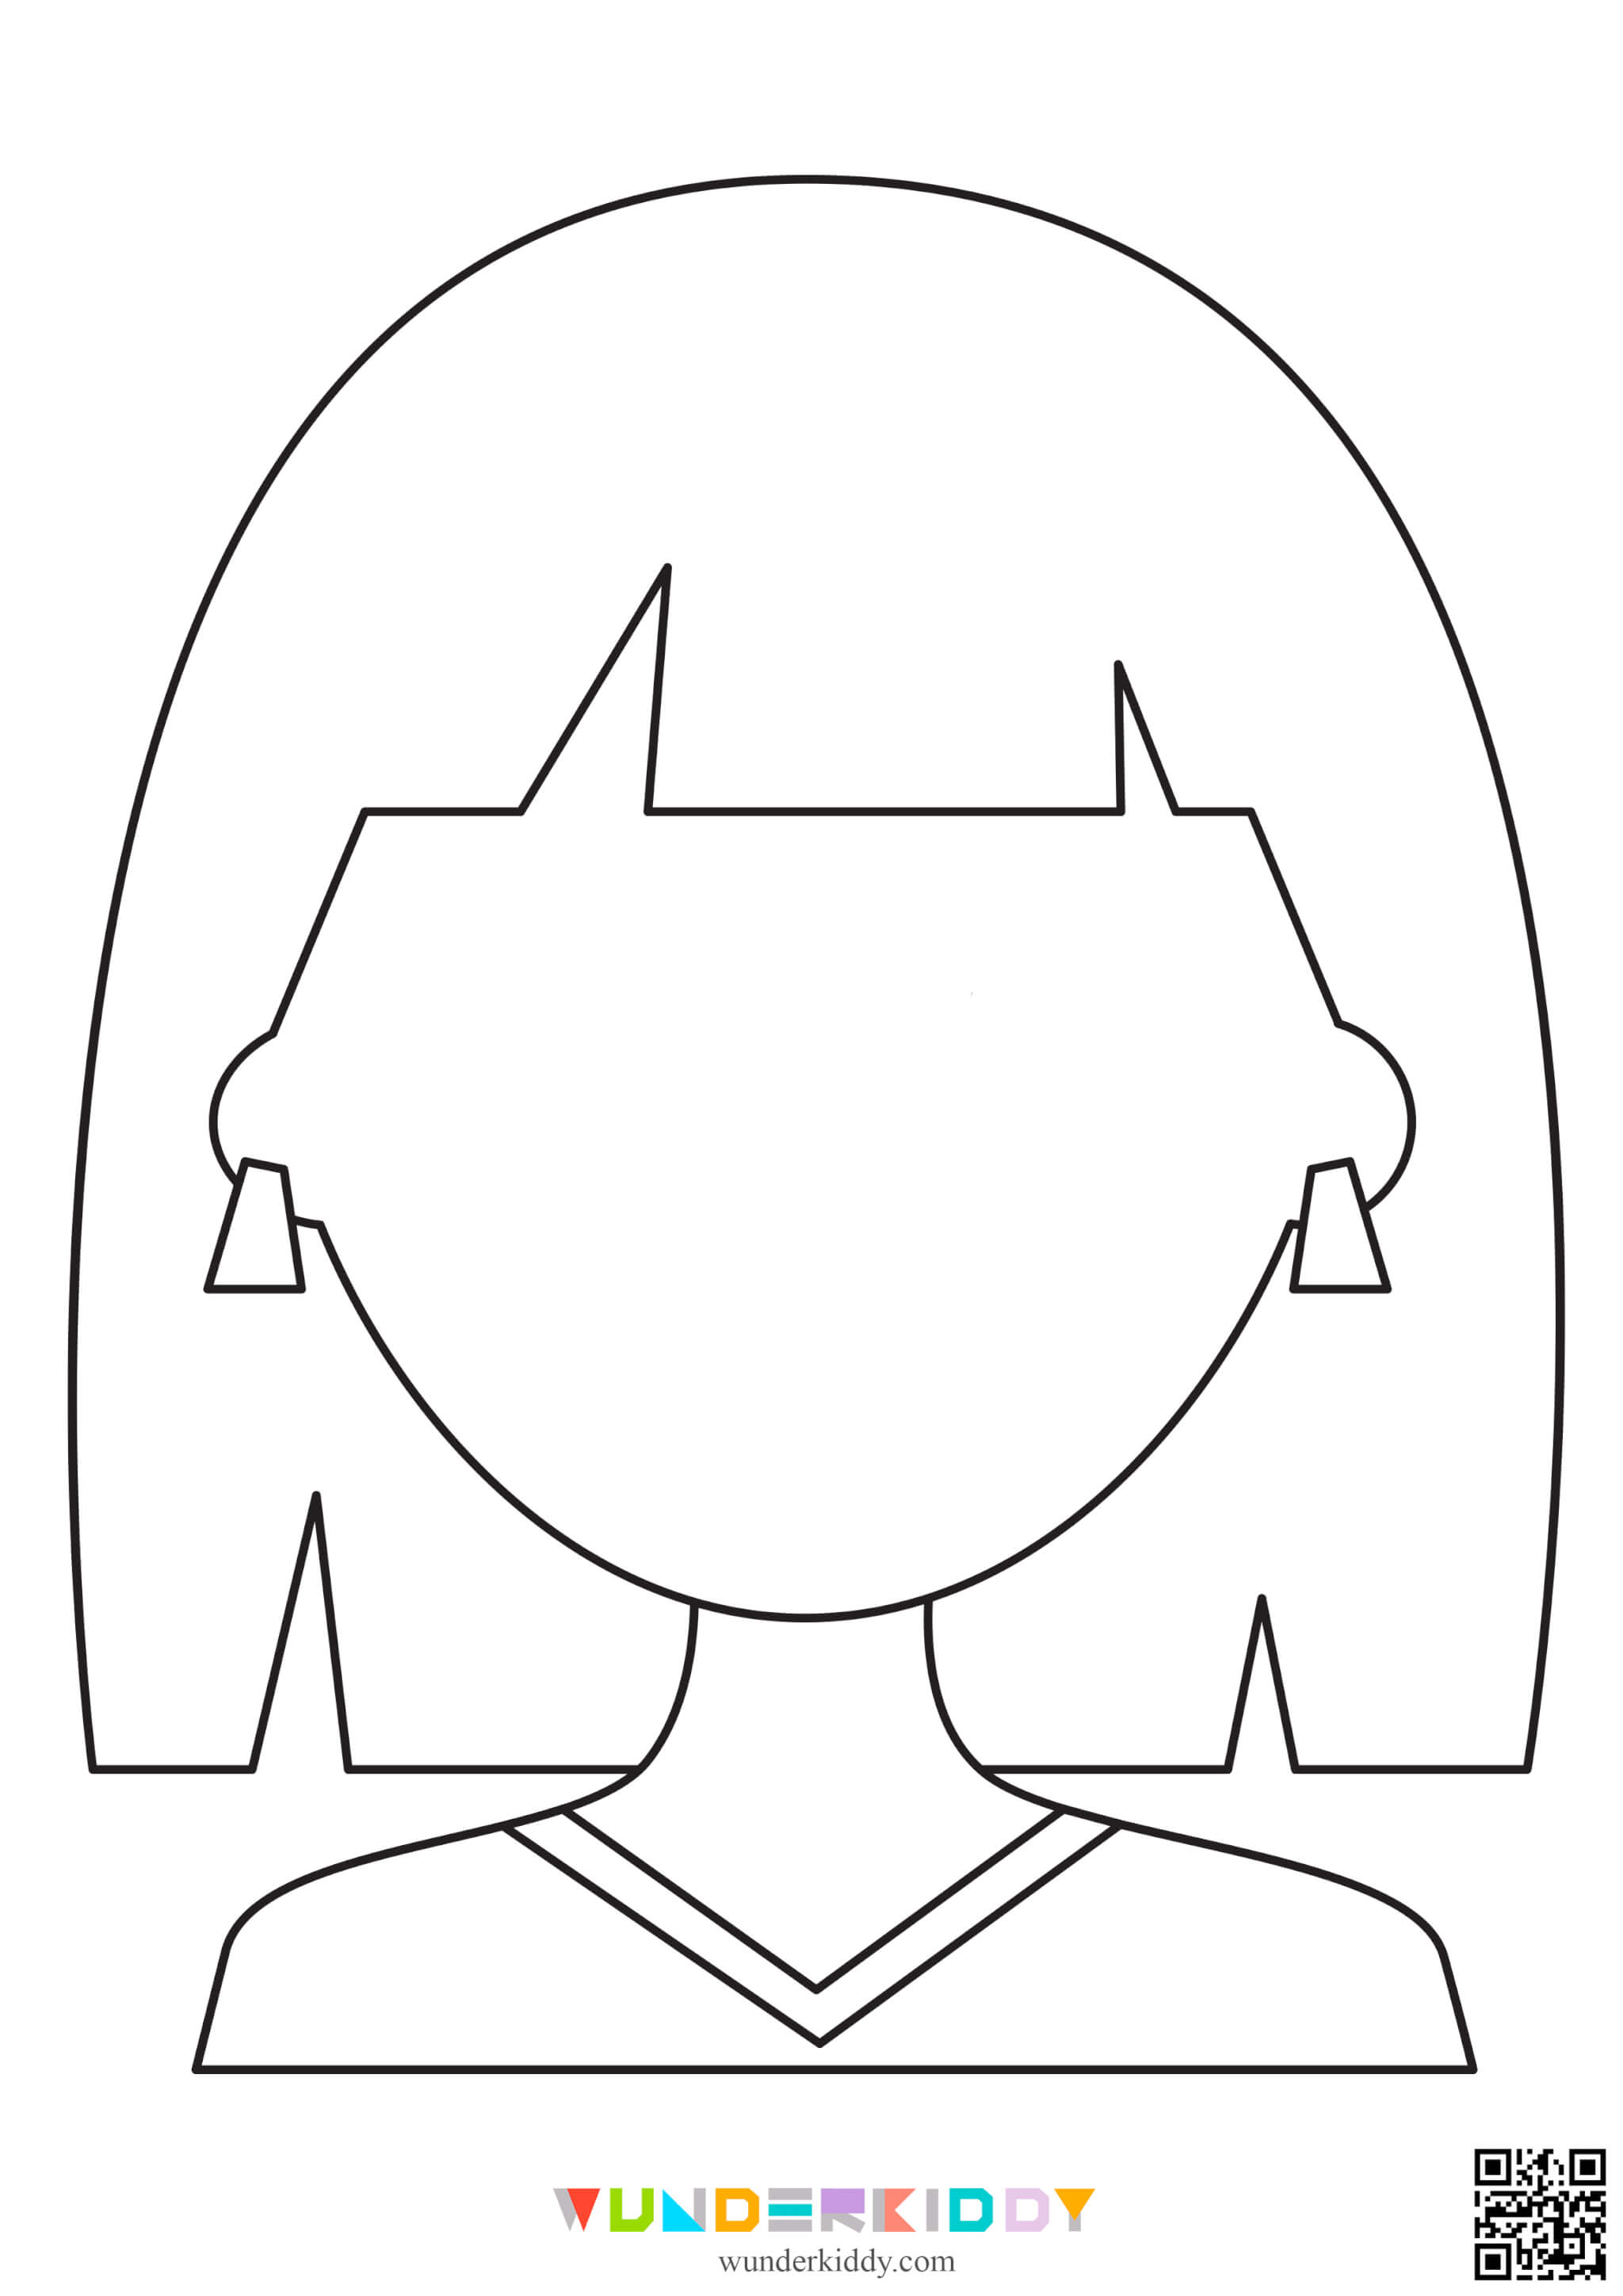 Blank Face Template - Image 2